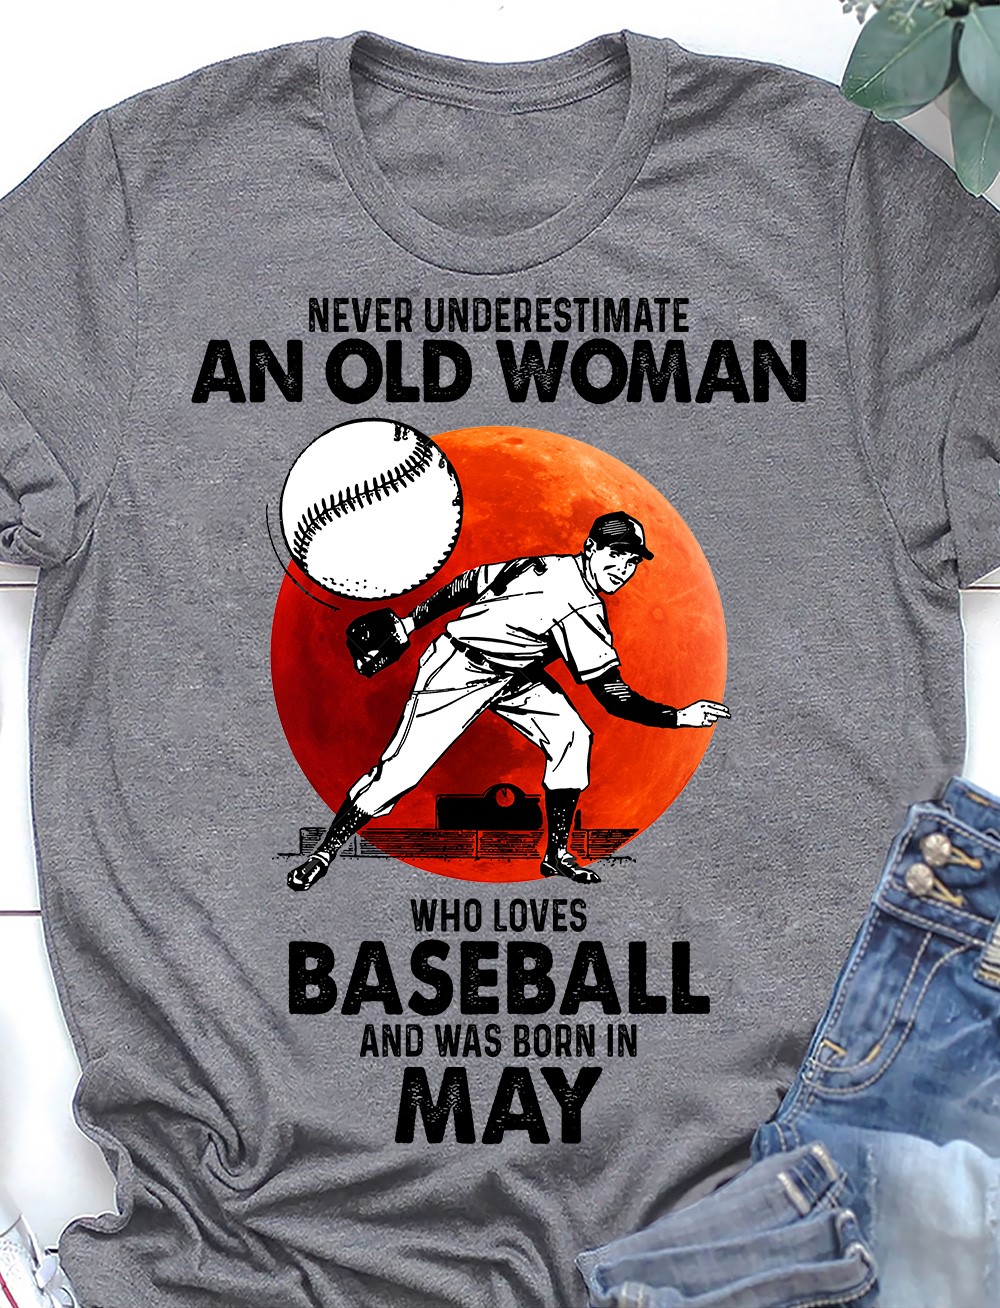 Never underestimate an old woman who loves baseball and was born in May